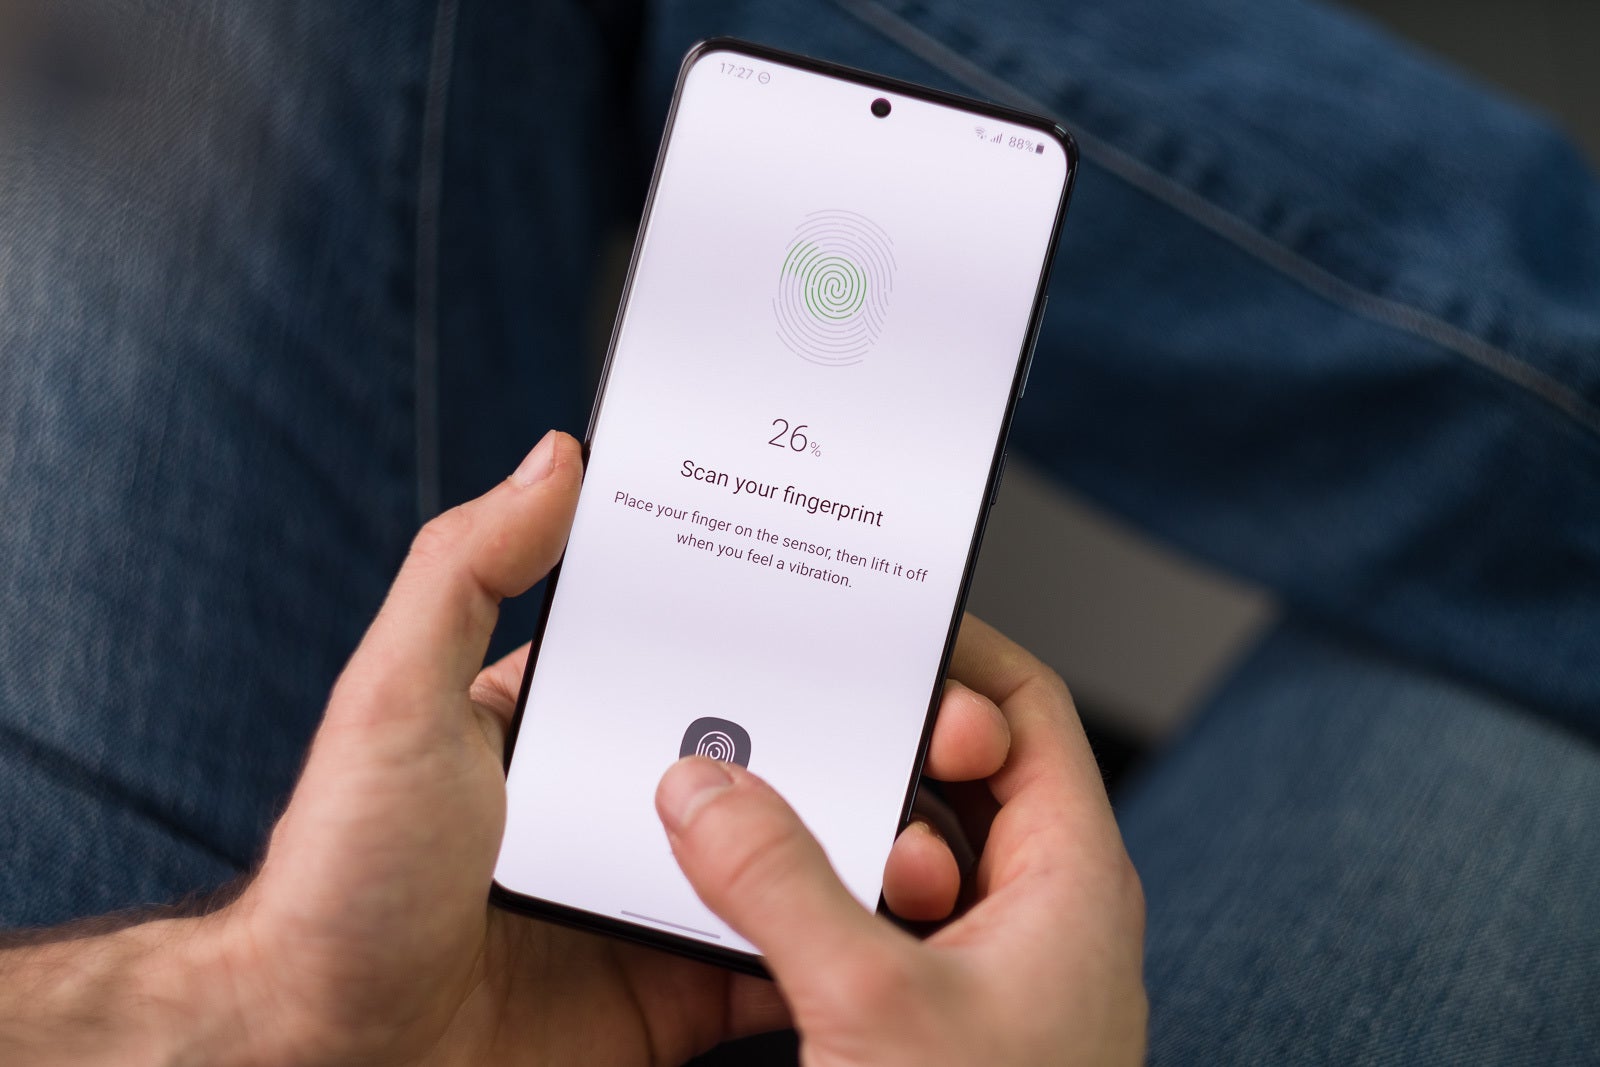 The Samsung Galaxy S20 Ultra already has an under-screen fingerprint scanner - Under-screen Touch ID for iPhone now seems even more likely